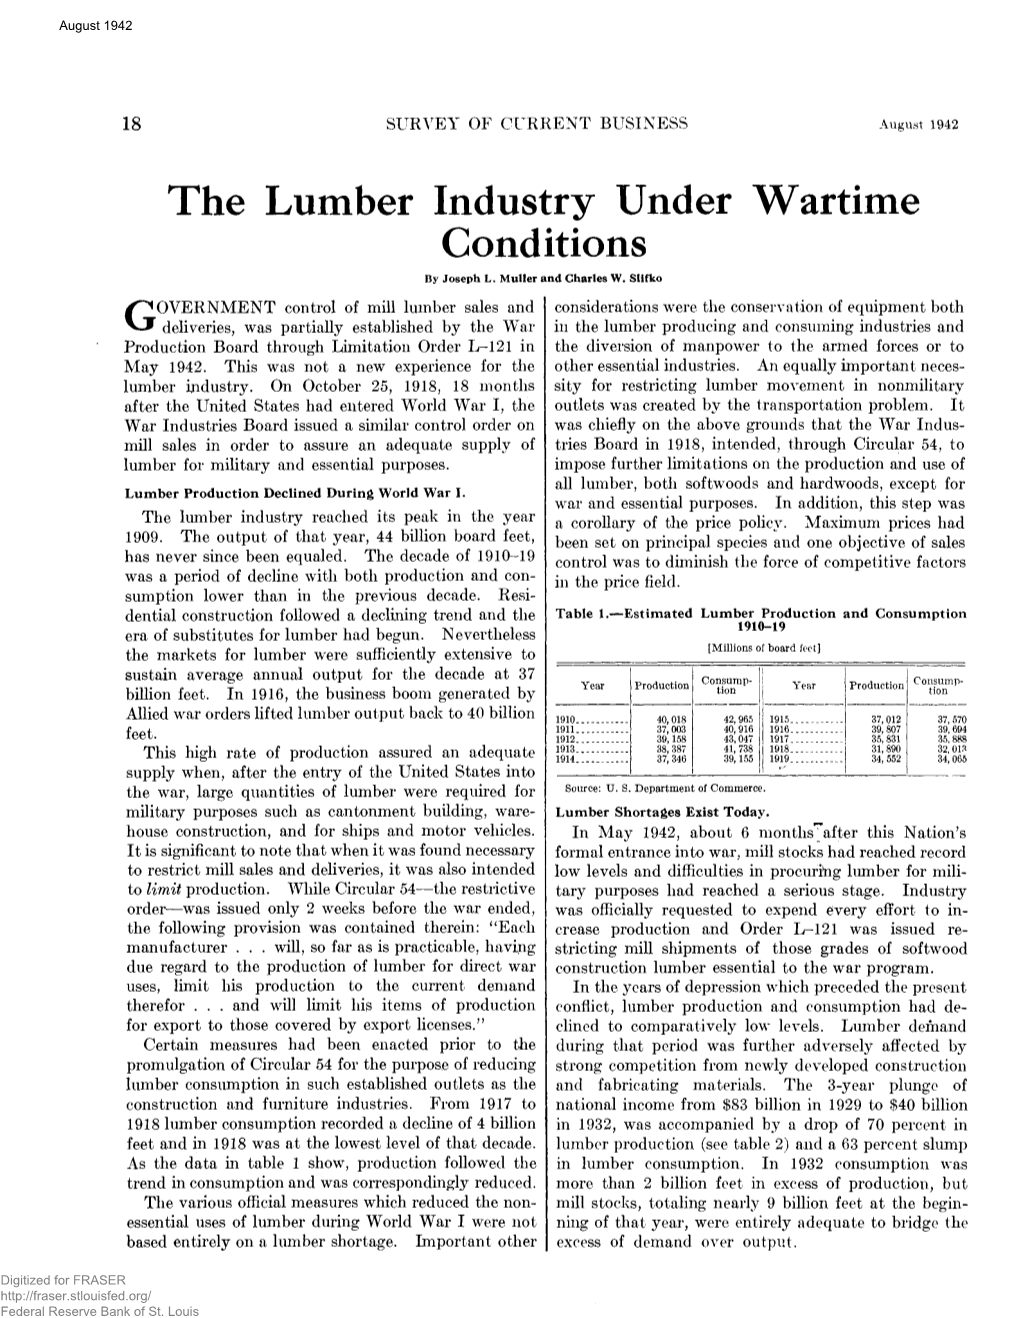 Lumber Industry Under Wartime Conditions by Joseph L